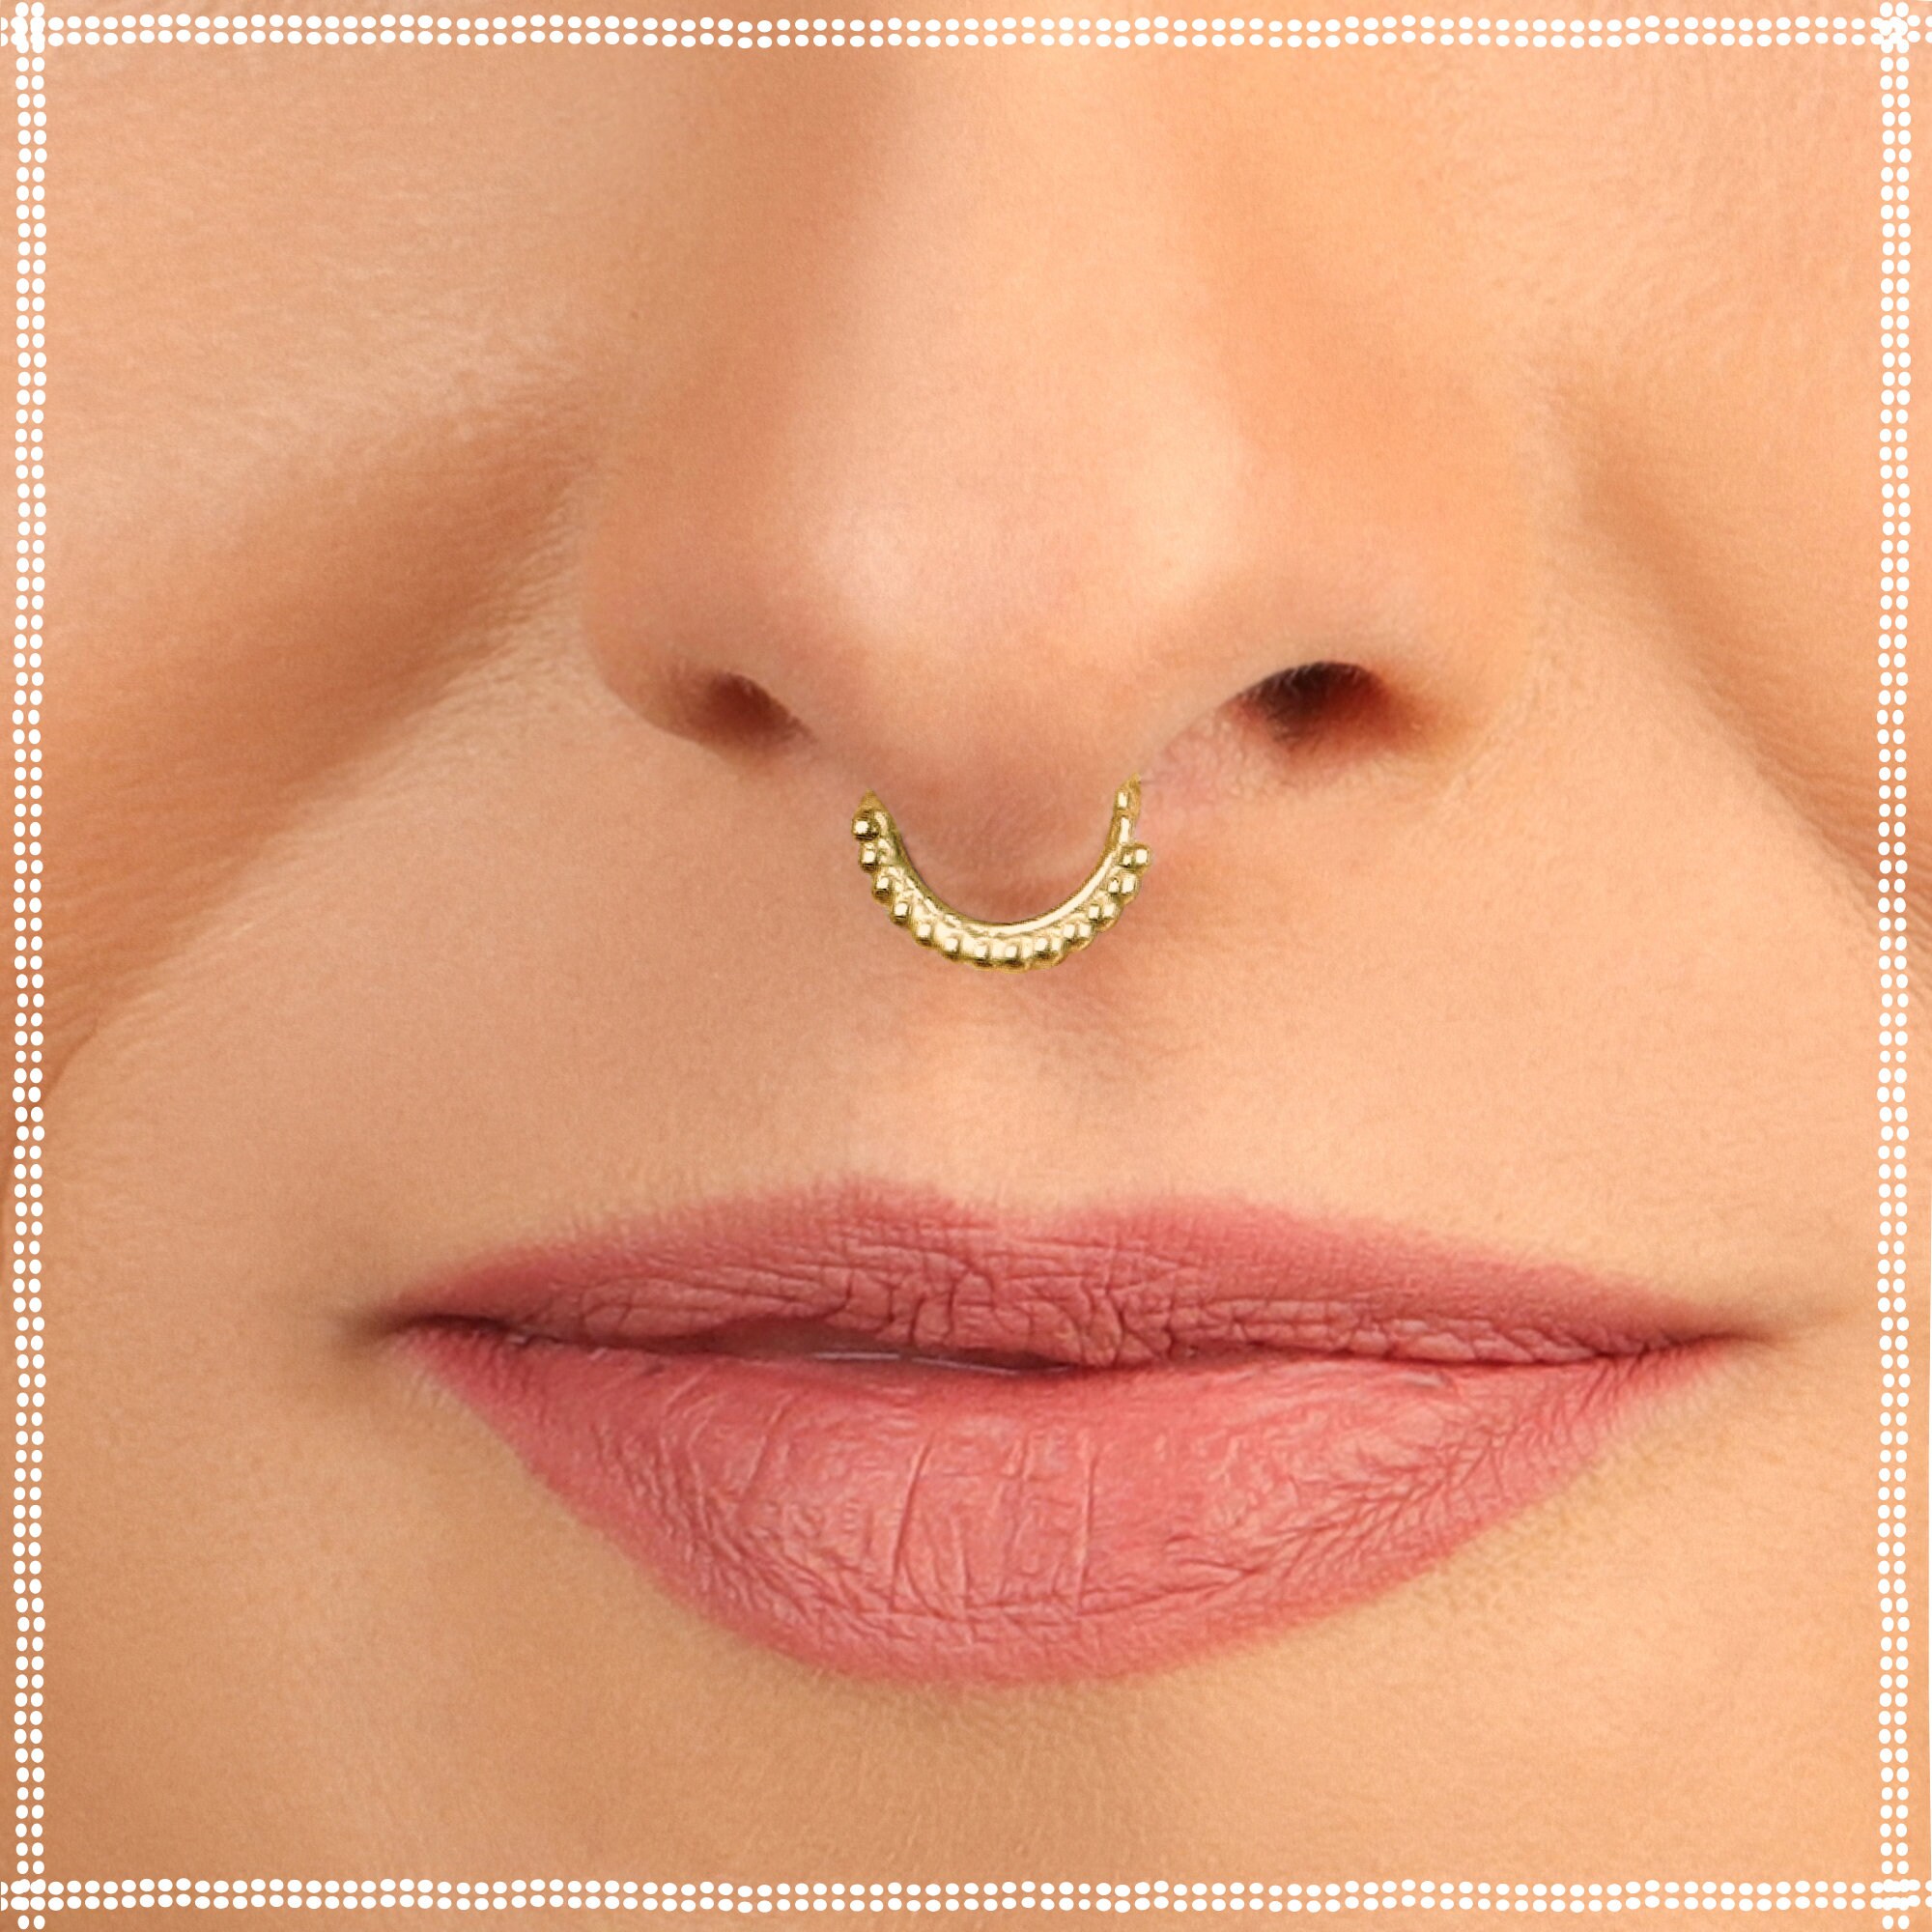 Silver Tribal Septum Ring Nose Piercing 1mm For Pierced Nose